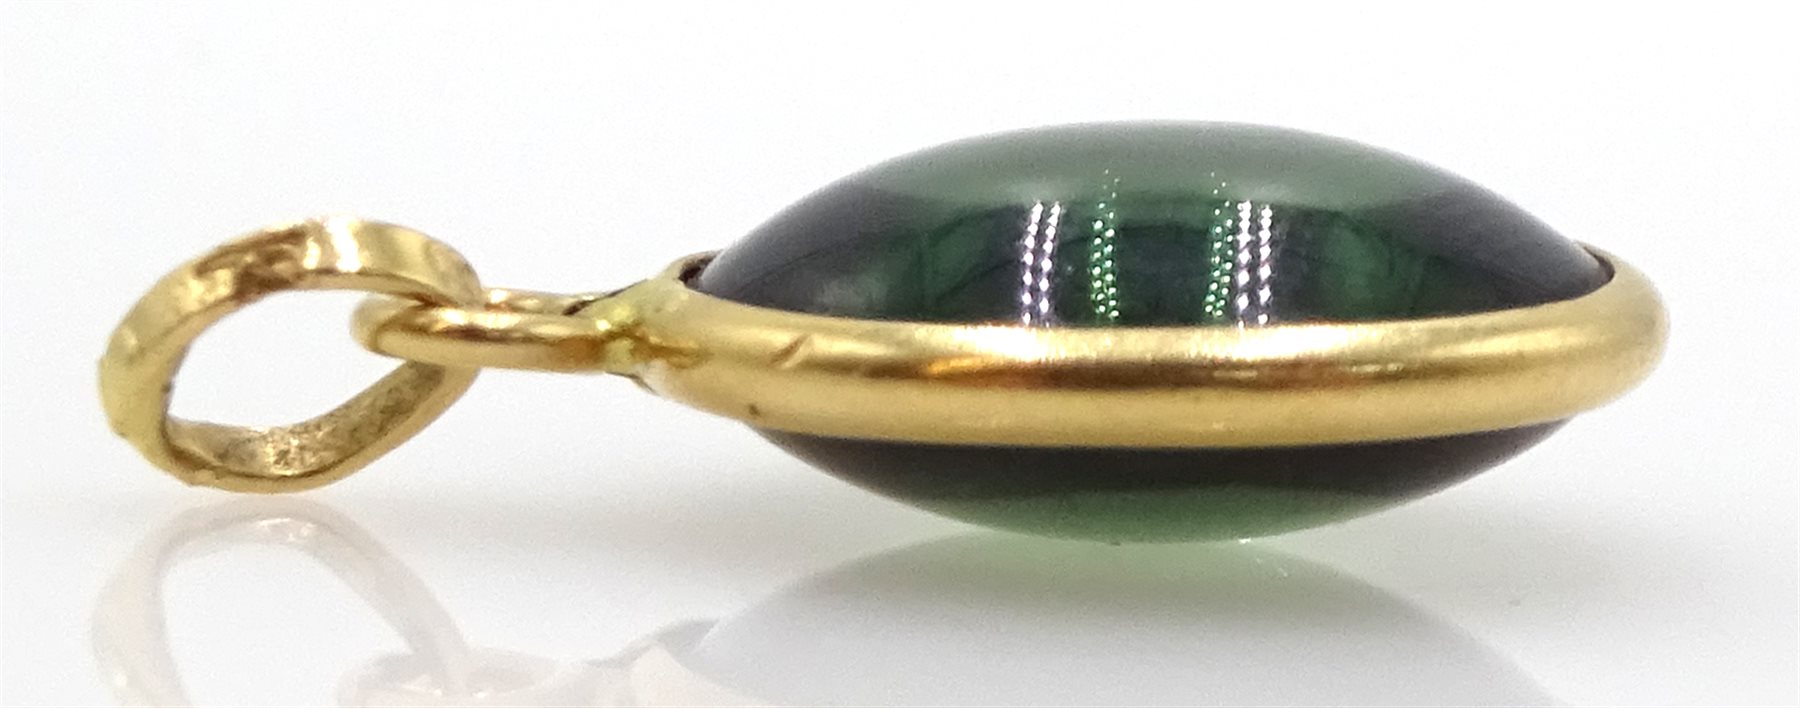 Gold mounted cabochon green tourmaline pendant, stamped 18K - Image 2 of 2